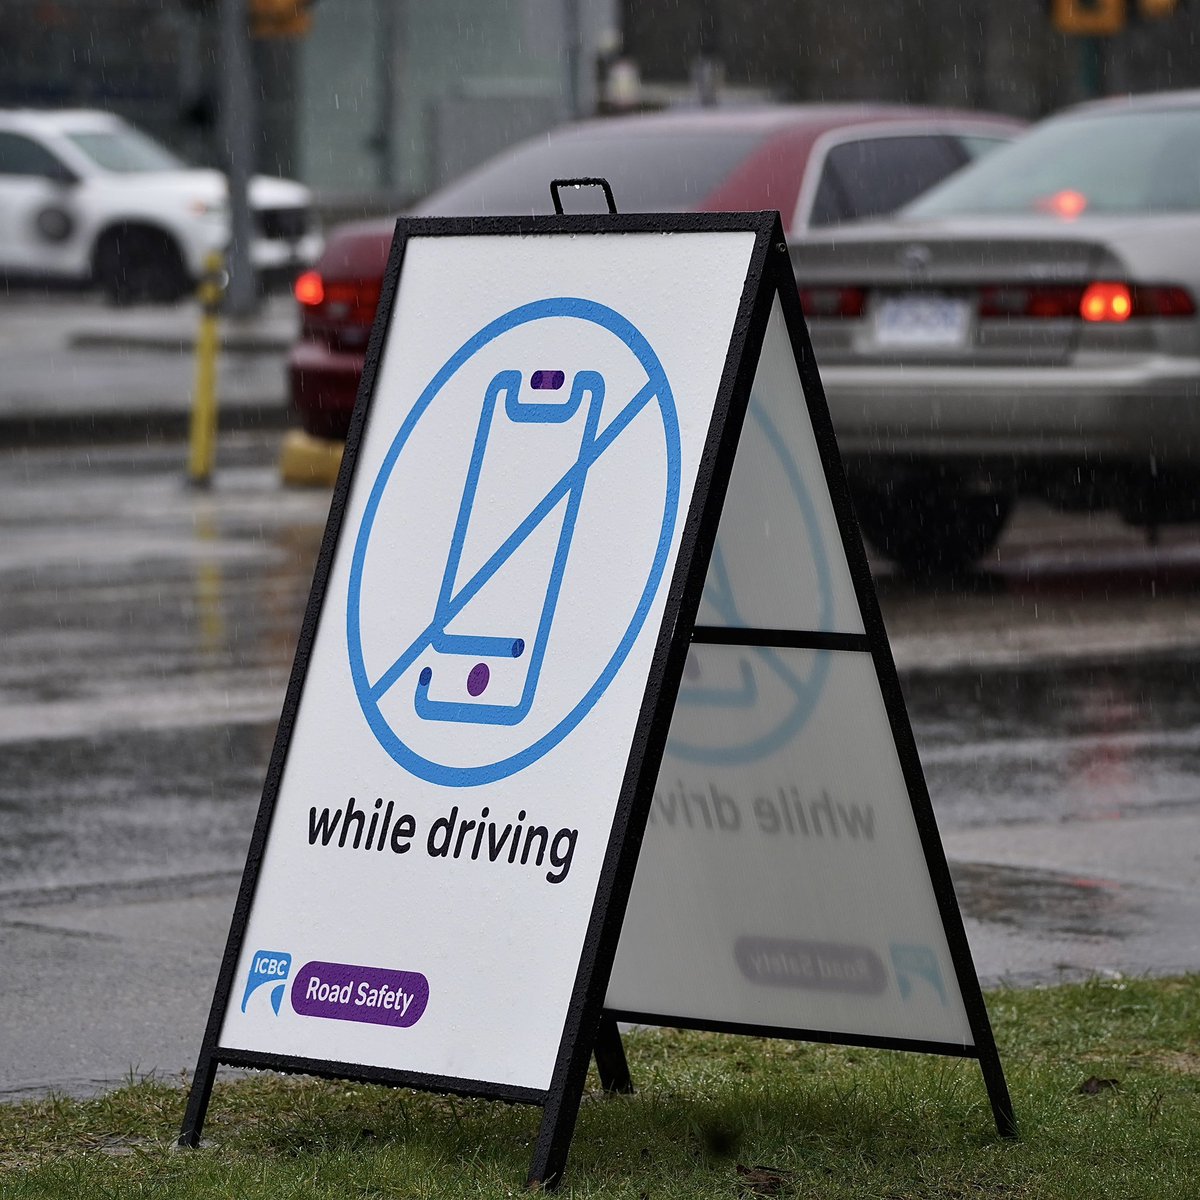 Today marked the kick-off to distracted driving month in B.C. Rain or shine, we will be out there conducting enhanced enforcement throughout month of March! #leavethephonealone #eyesforwardbc #portmoody @roadsafetykath @RoadSafetyBC @icbc